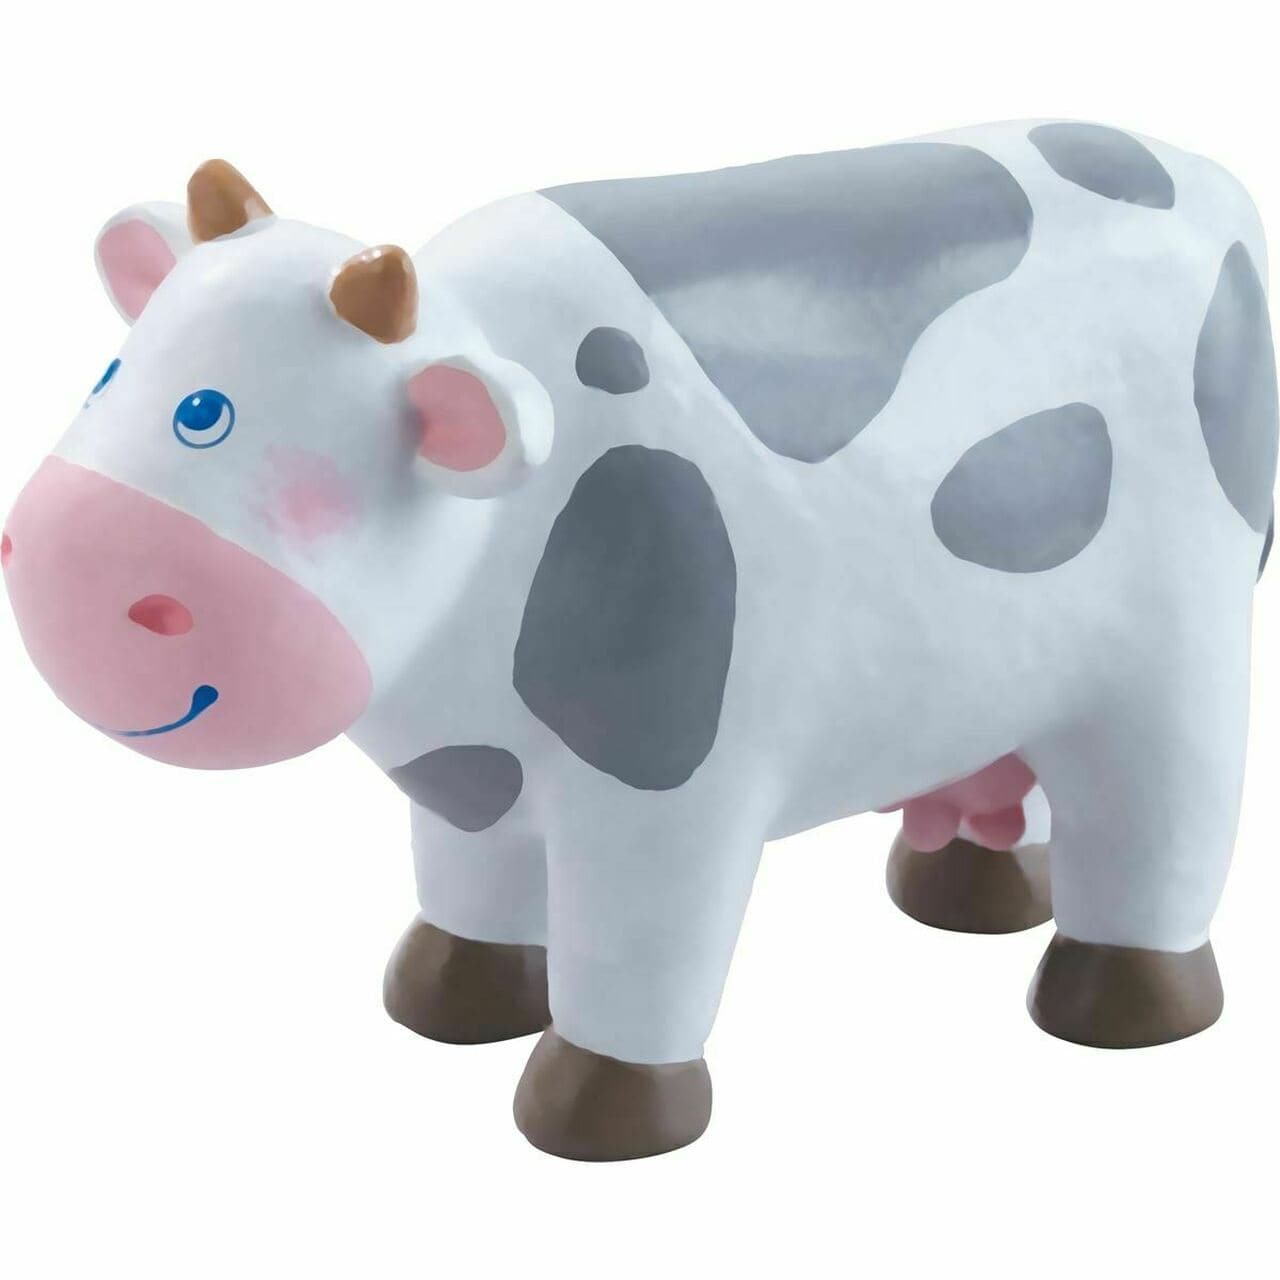 Haba-Little Friends Cow-302979-Legacy Toys